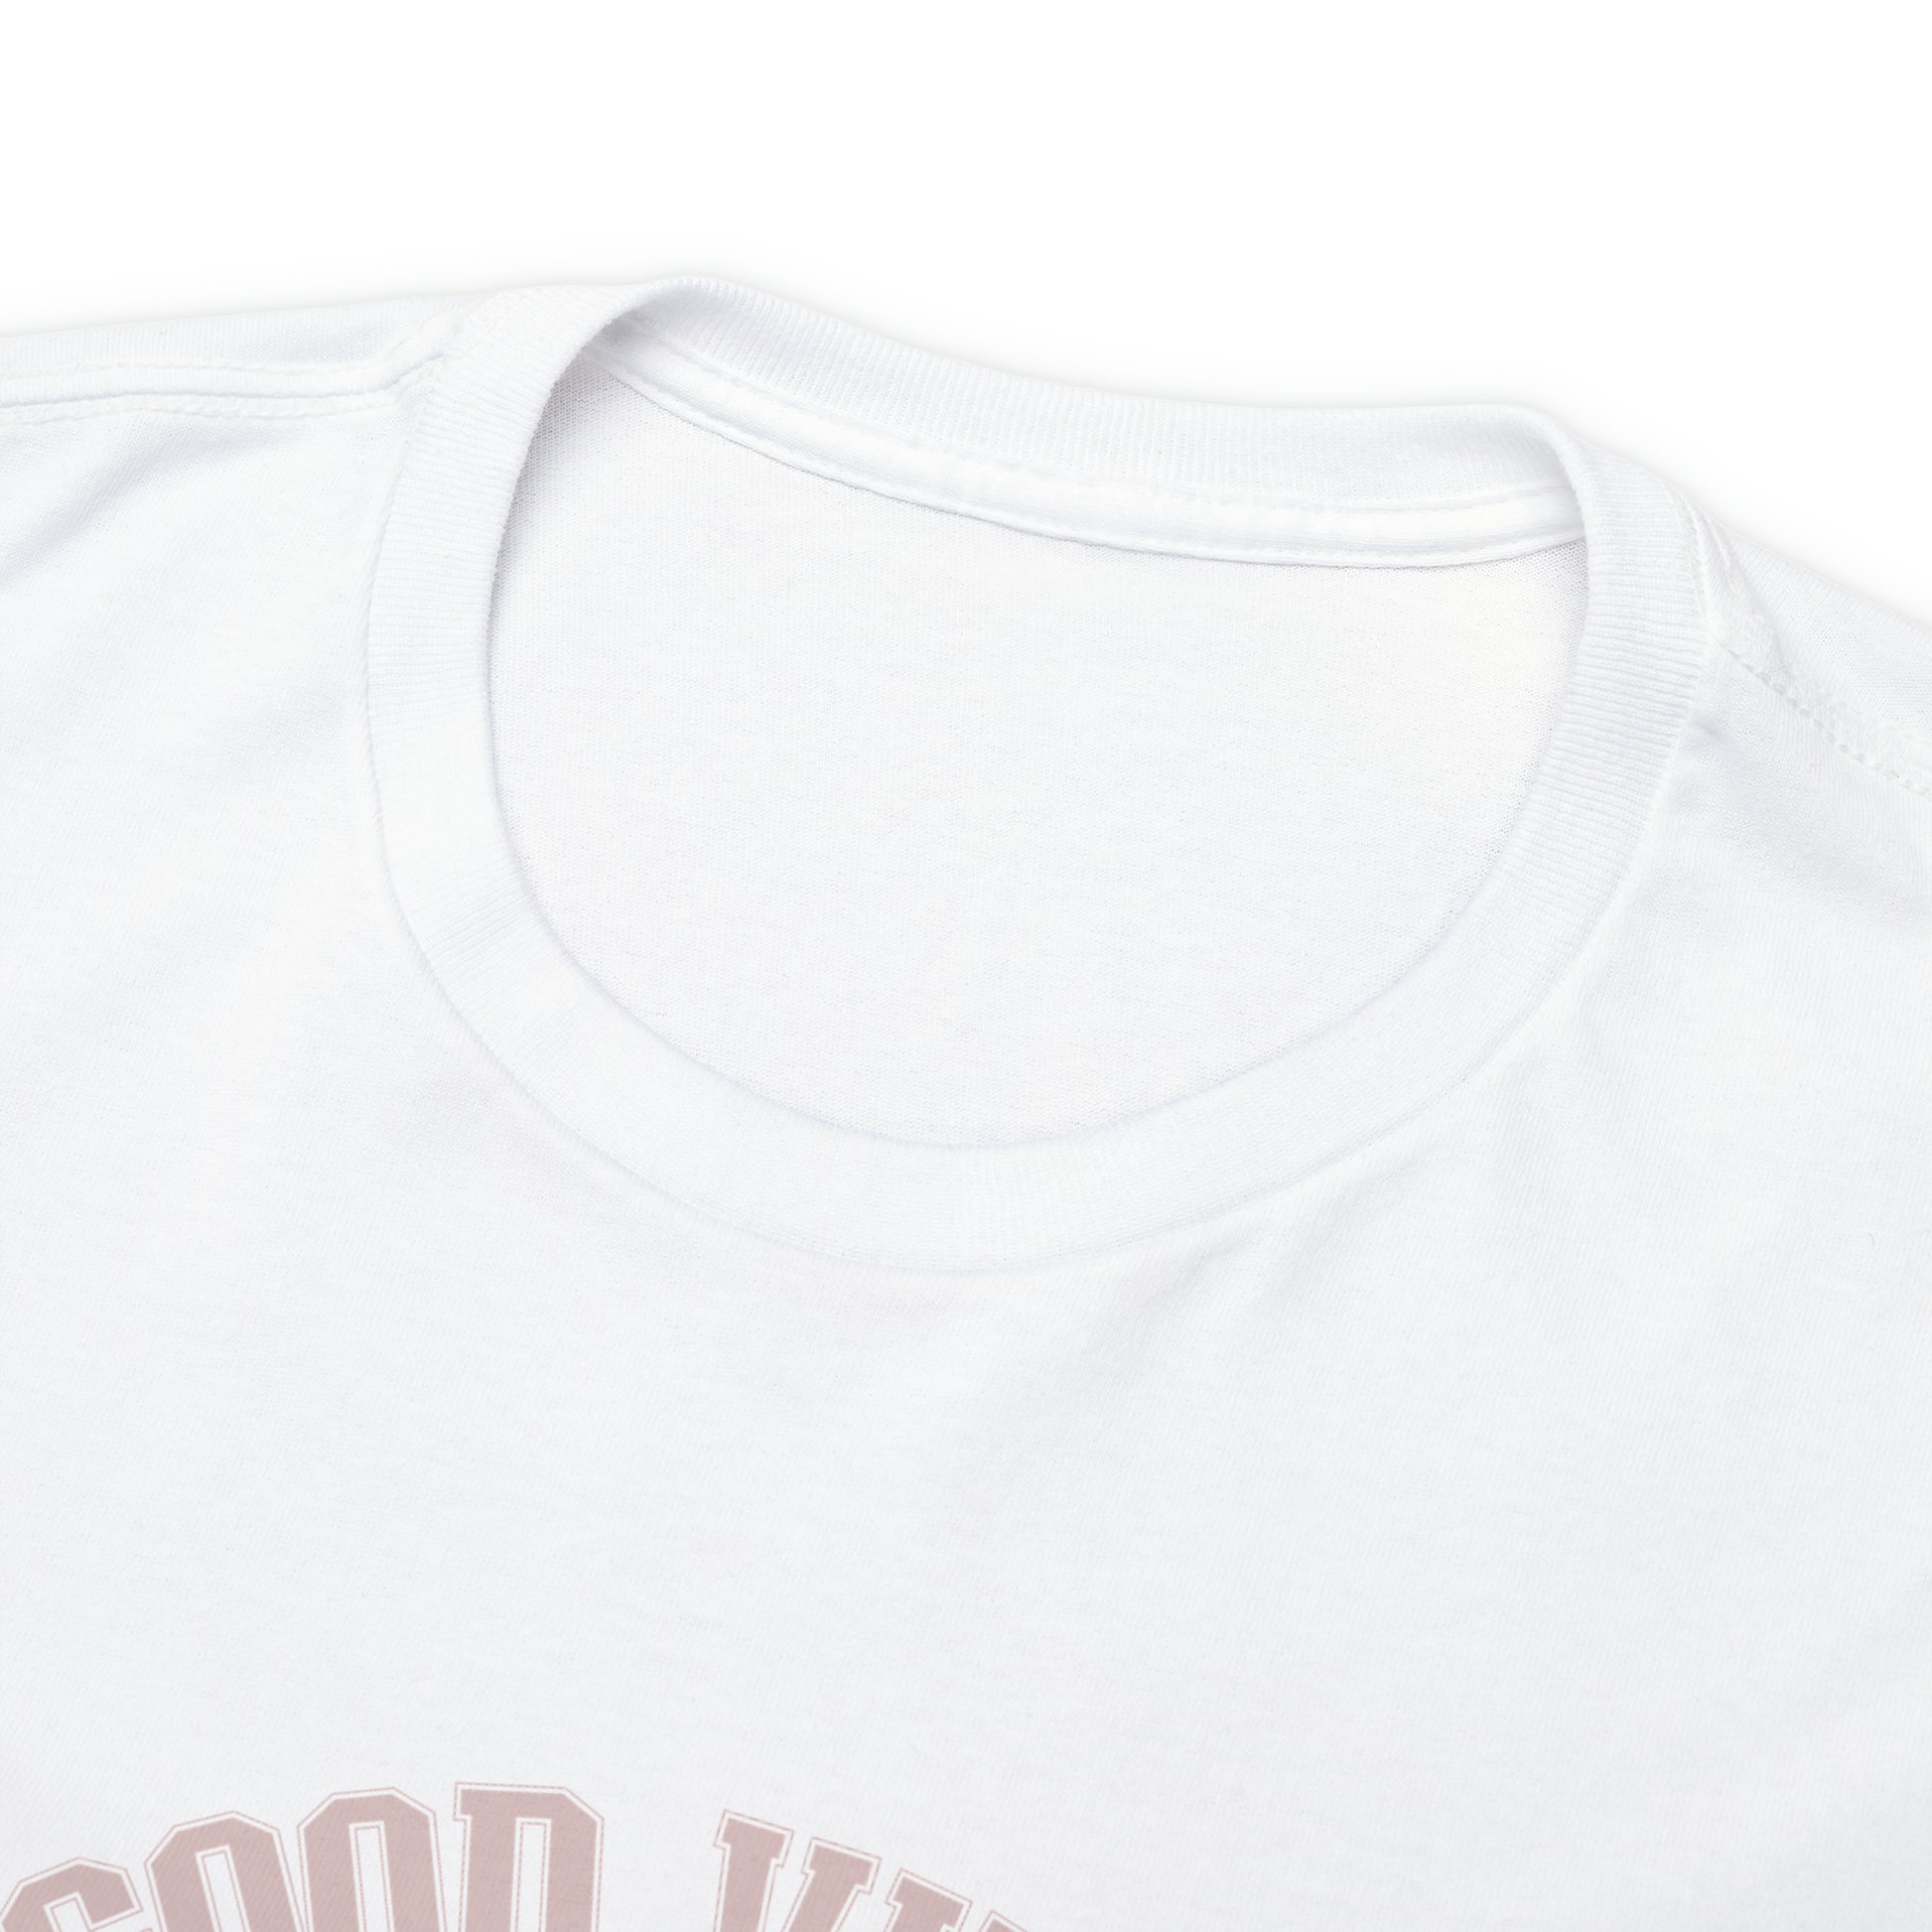 Good vibes member only T shirt